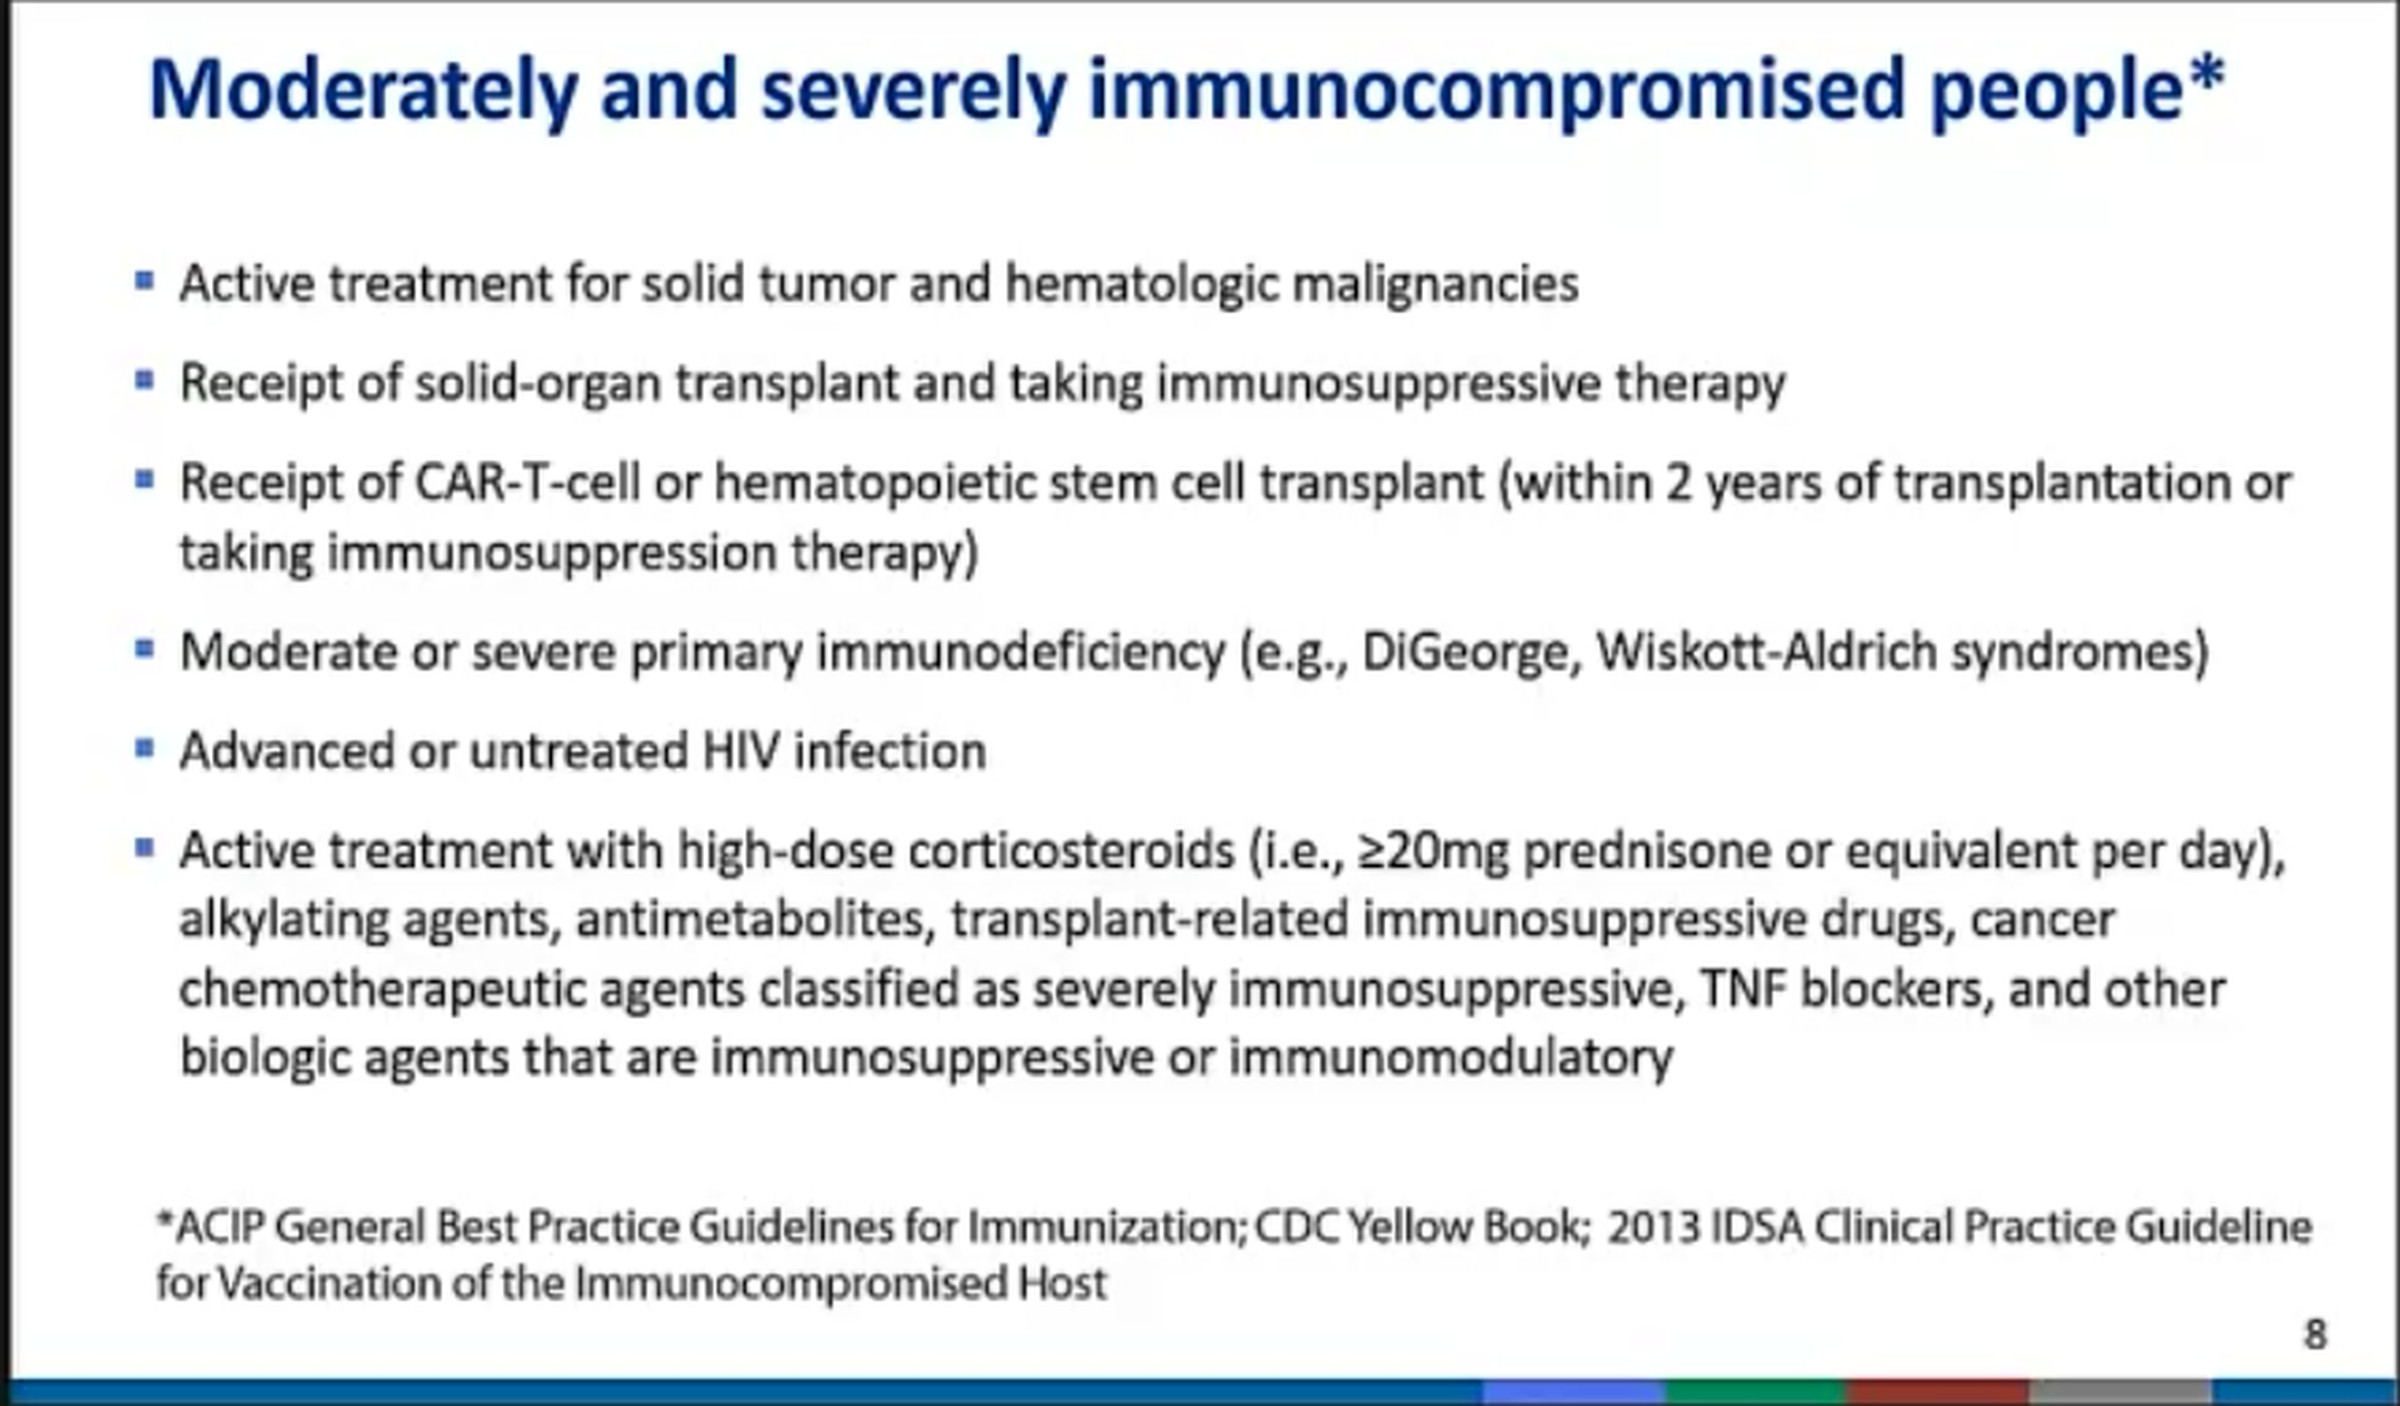 List of immunosuppressive conditions that could qualify for a third dose. Active treatment for solid tumor and hematologic malignancies, receipt of solid-organ transplant and taking immunosuppressive therapy, receipt of CAR-T-cell or hematopoietic stem cell transplant (within 2 years of transplantation or taking immunosuppression therapy), moderate or severe primary immunodeficiency, advanced or untreated HIV infection, active treatment with biologic agents that are immunosuppressive